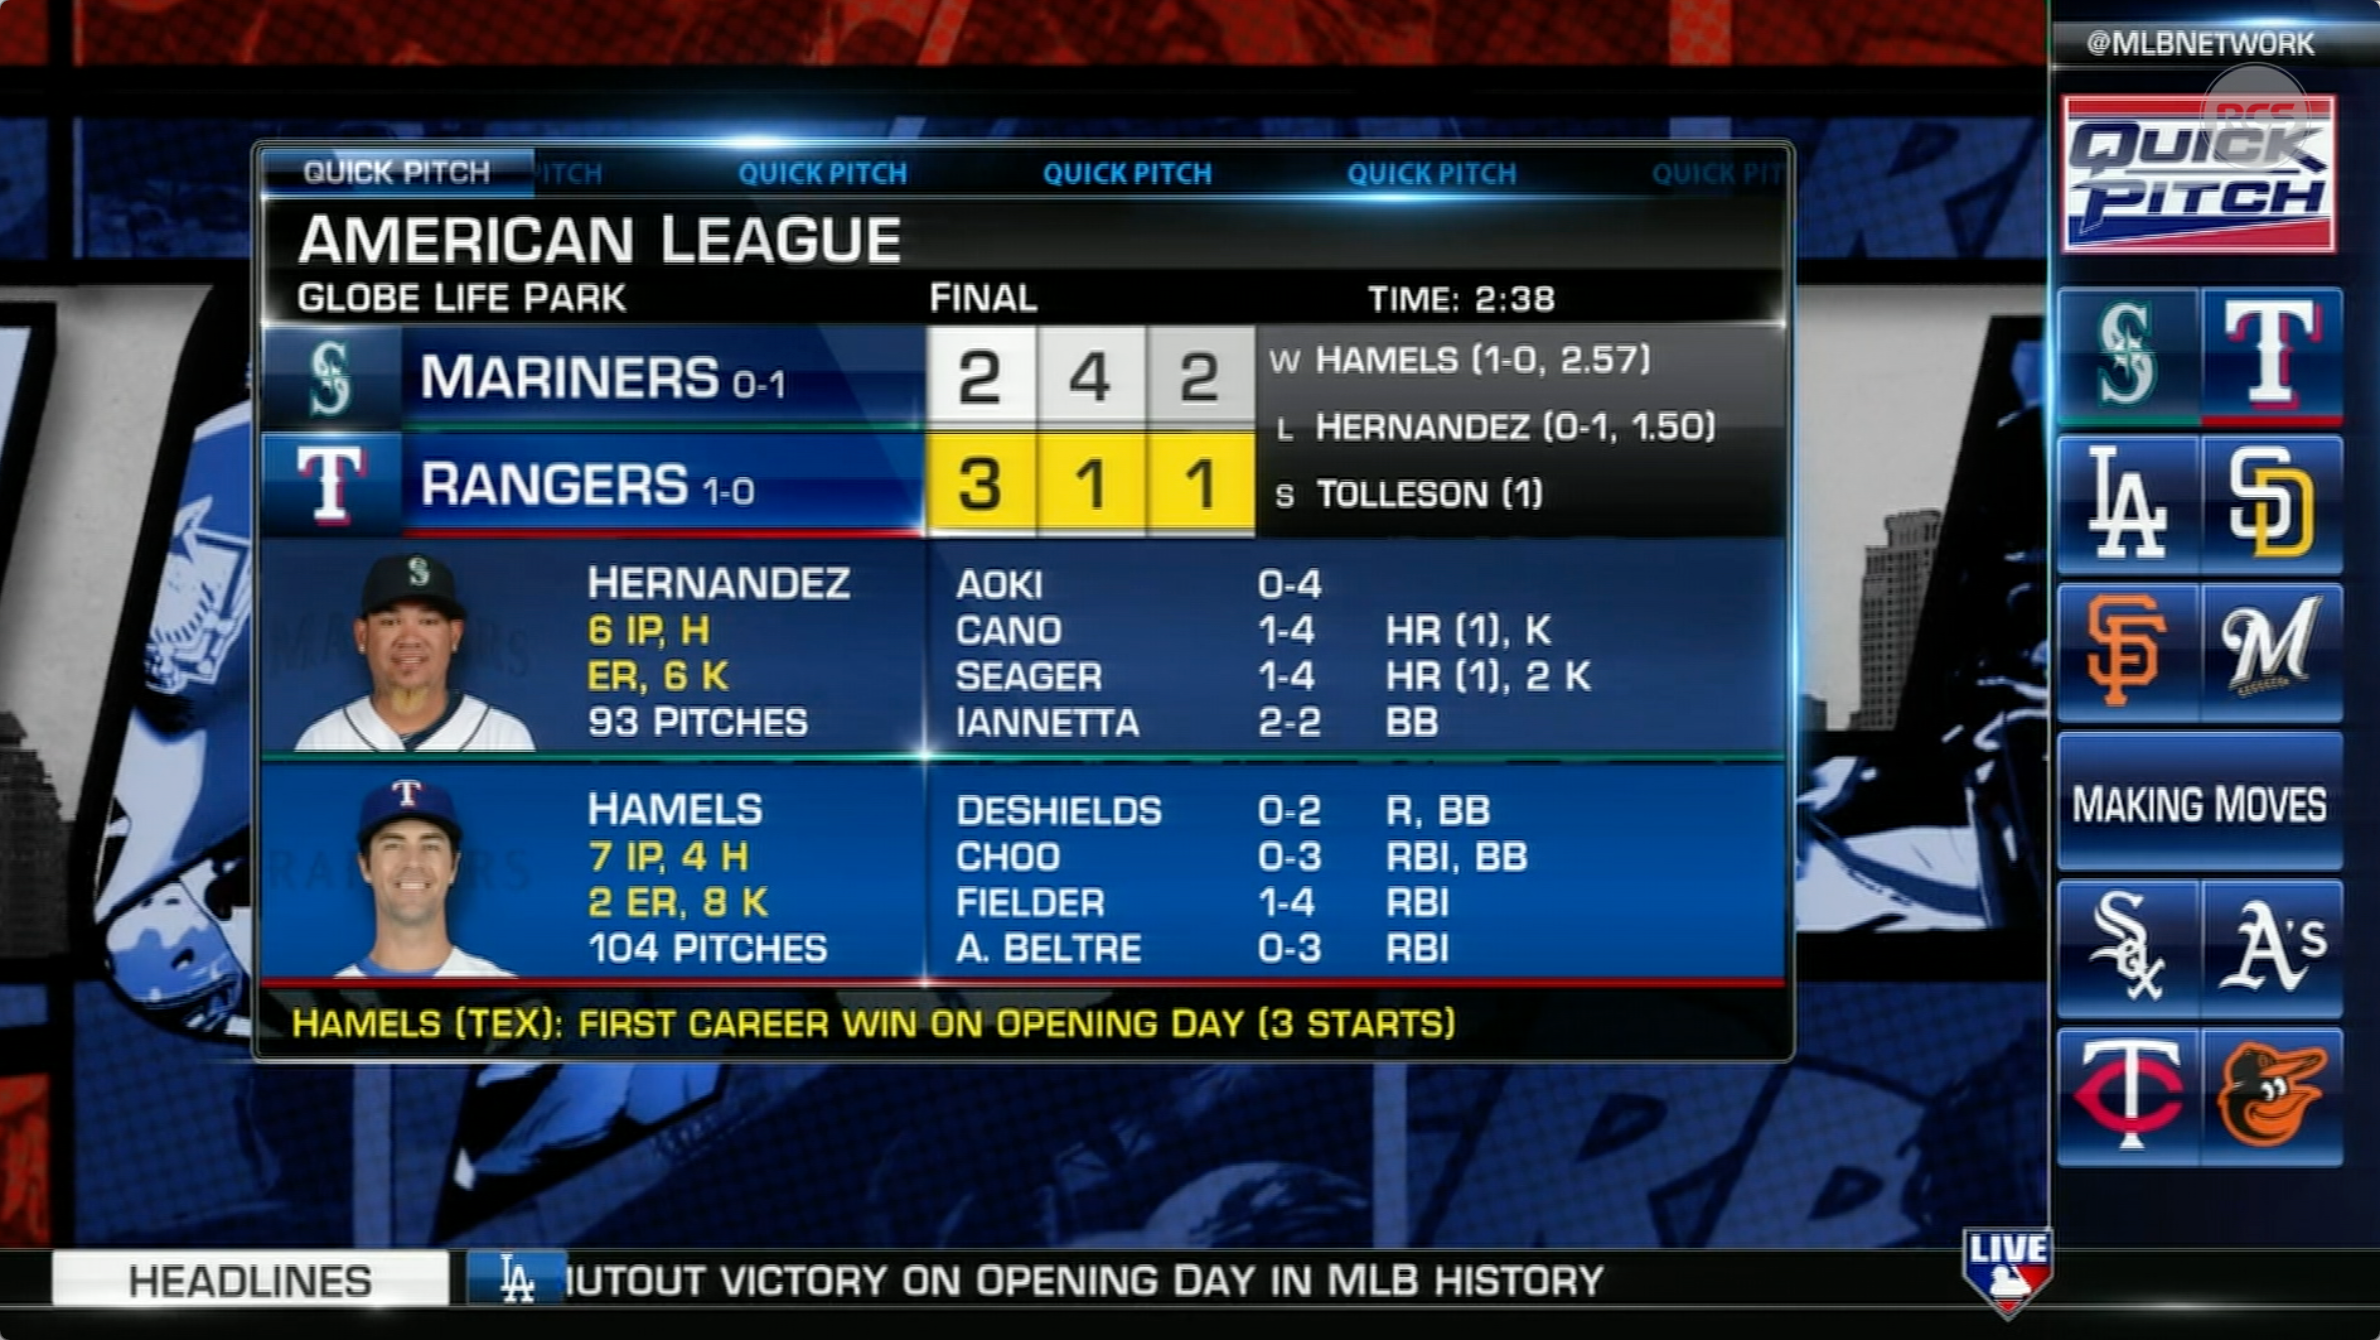 RCS Revamps MLB Network Graphics Package With New Cloud-Based Solution